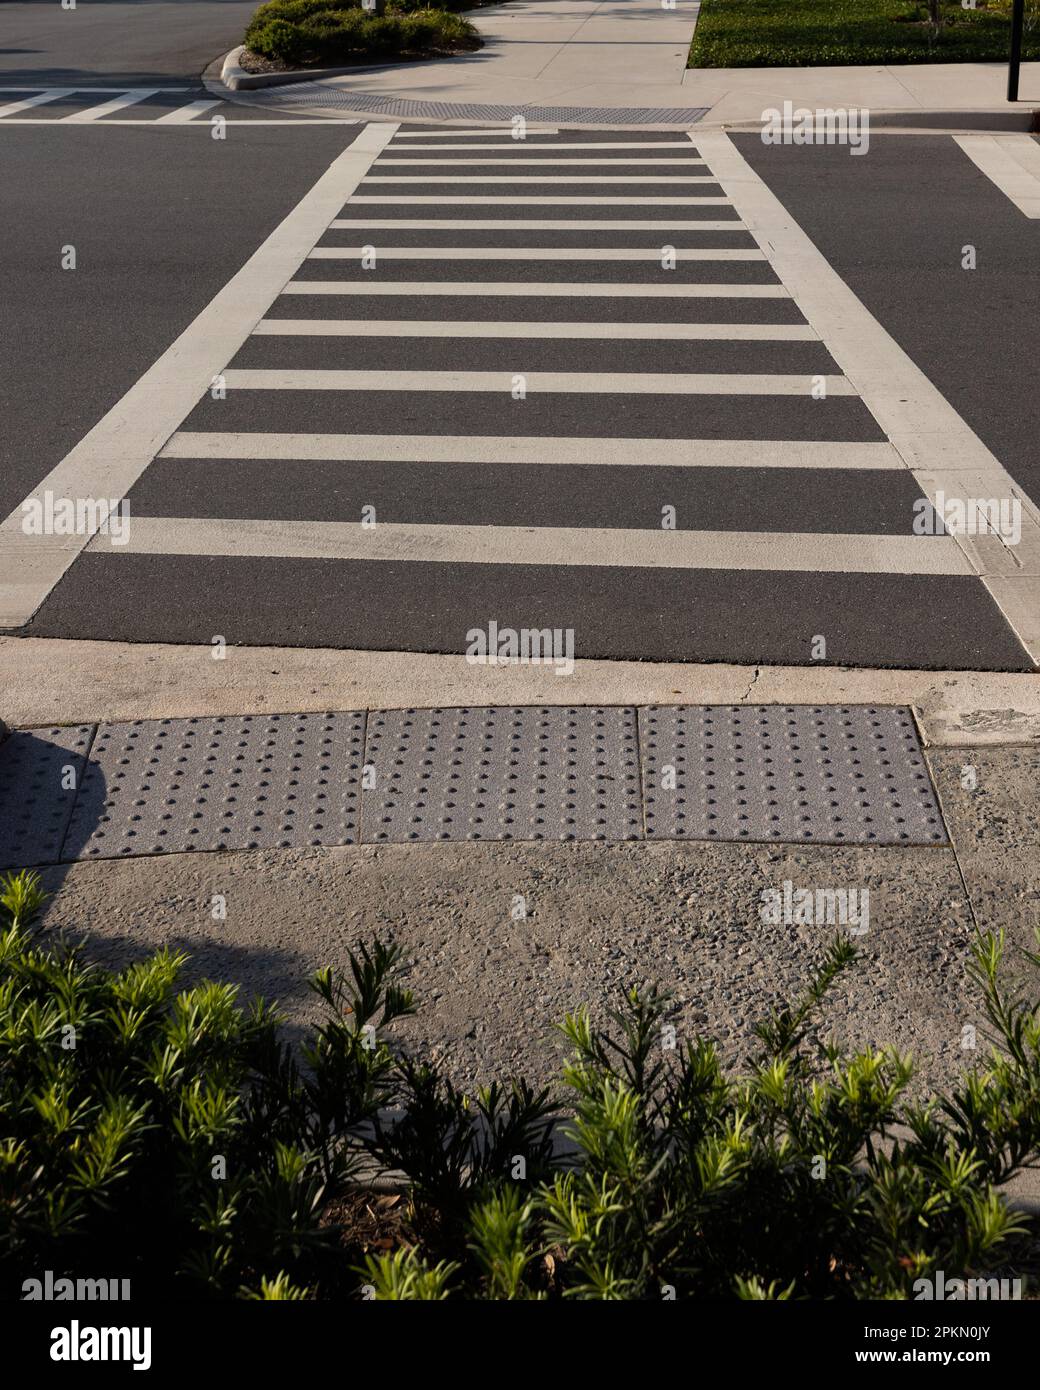 A picture of a white-painted crosswalk on the road, sunny day. Taken in the Lake Nona area, Florida. Stock Photo